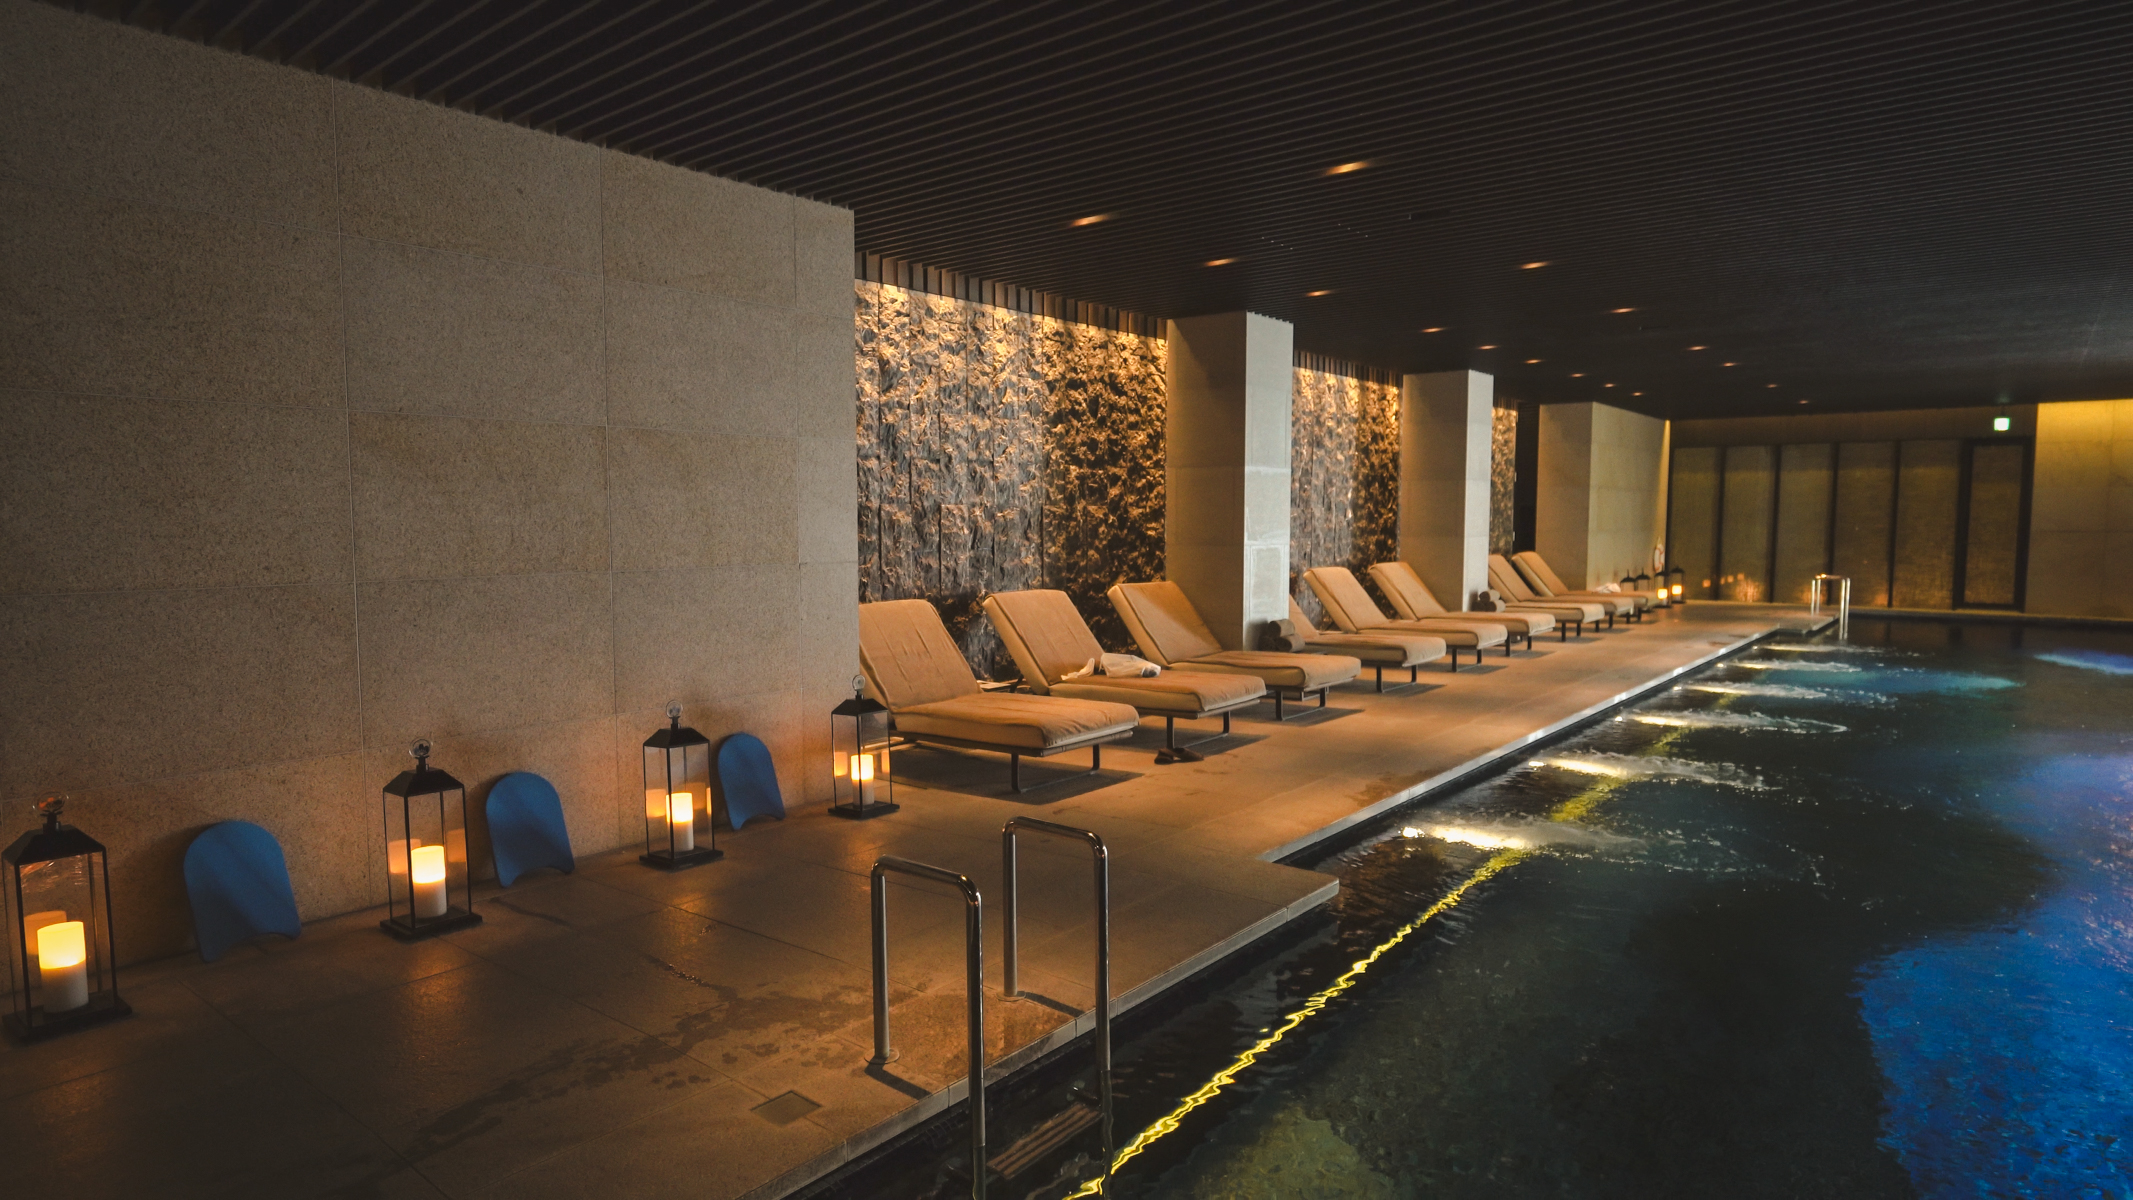 Pool and loungers against a grey wall with serene lighting and a dark roof.